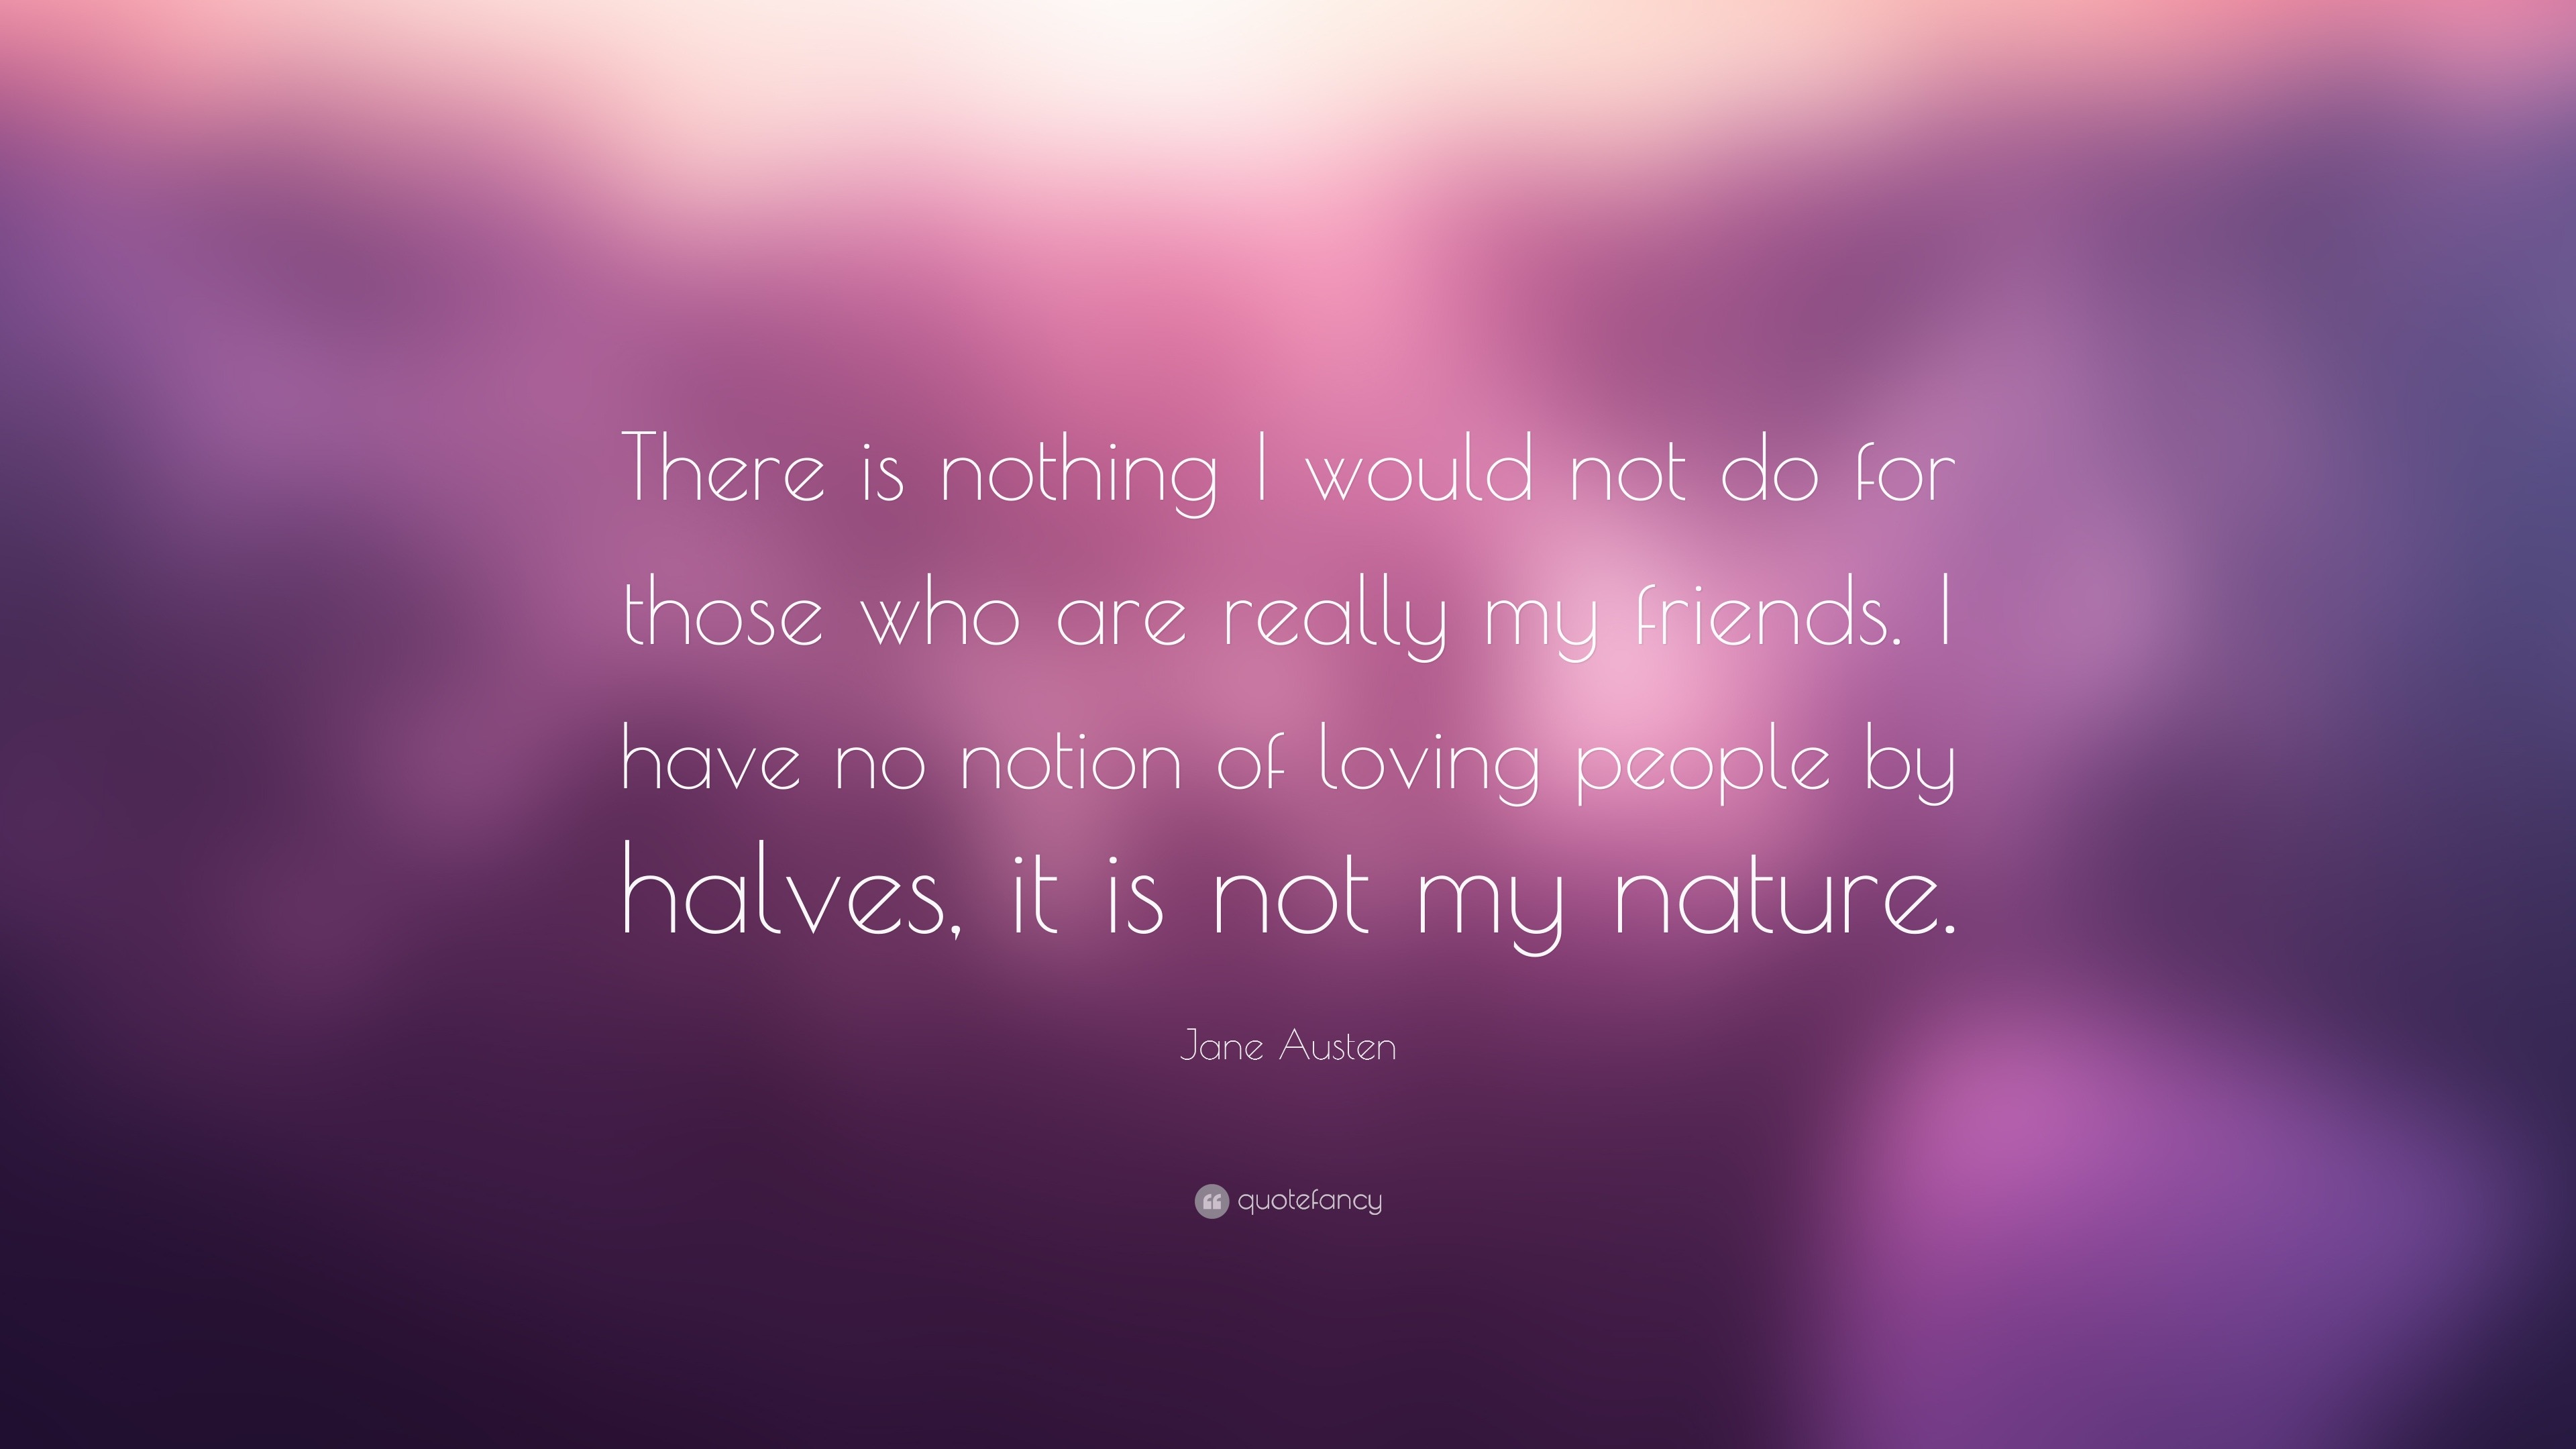 Jane Austen Quote “There is nothing I would not do for those who are